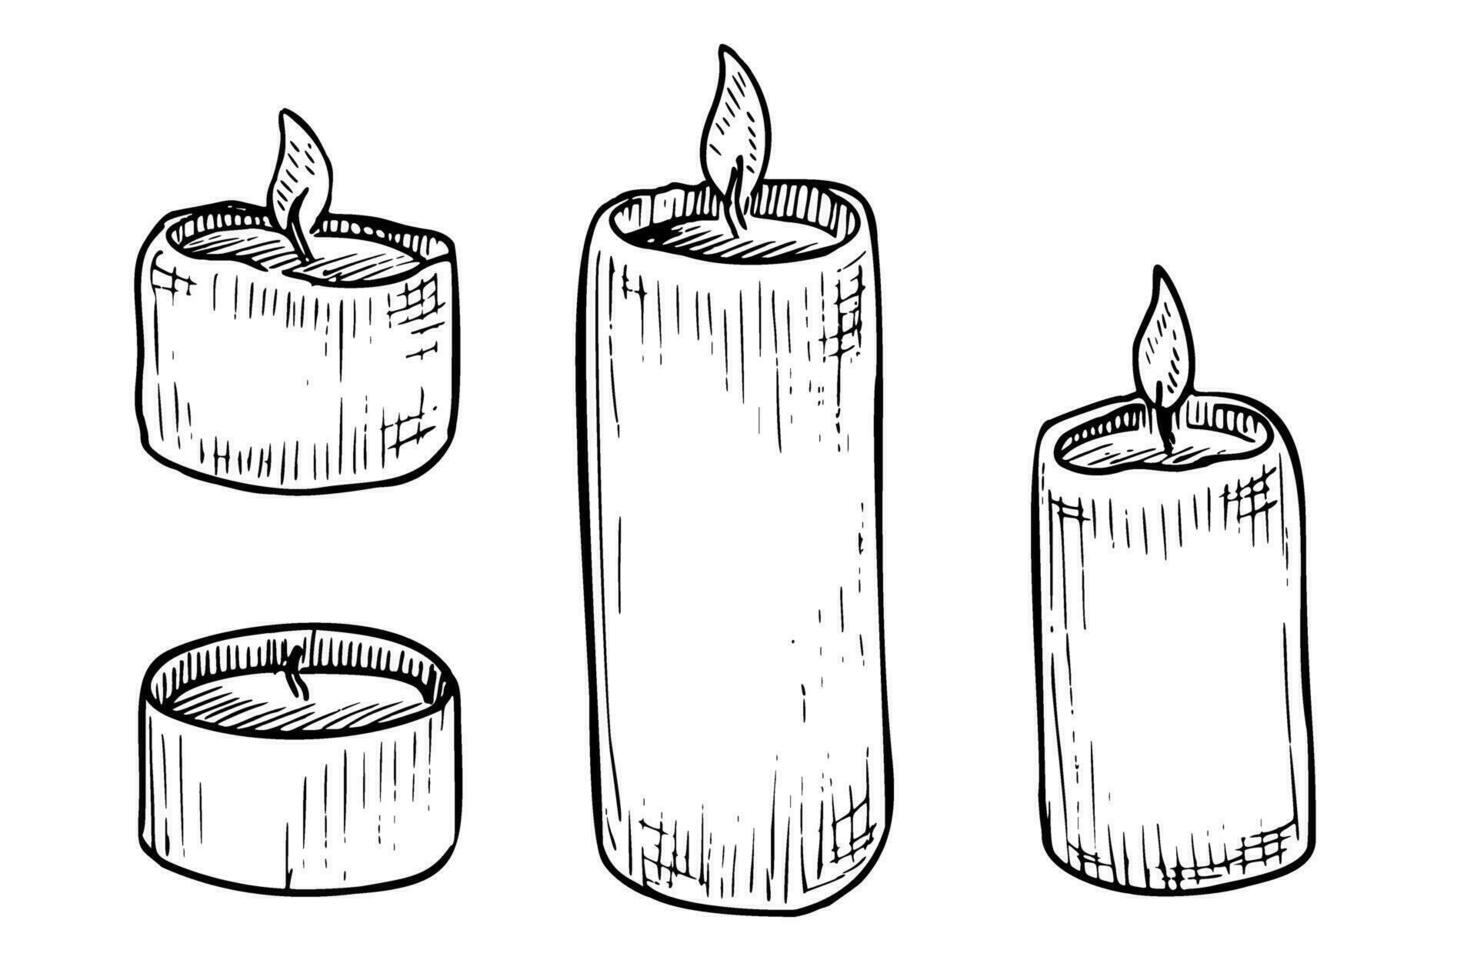 Set of Wax Candles with Candlelight. Hand drawn vector illustration of vintage light for cozy interior. Drawing in line art style painted by black inks on white background. Sketch of home decor